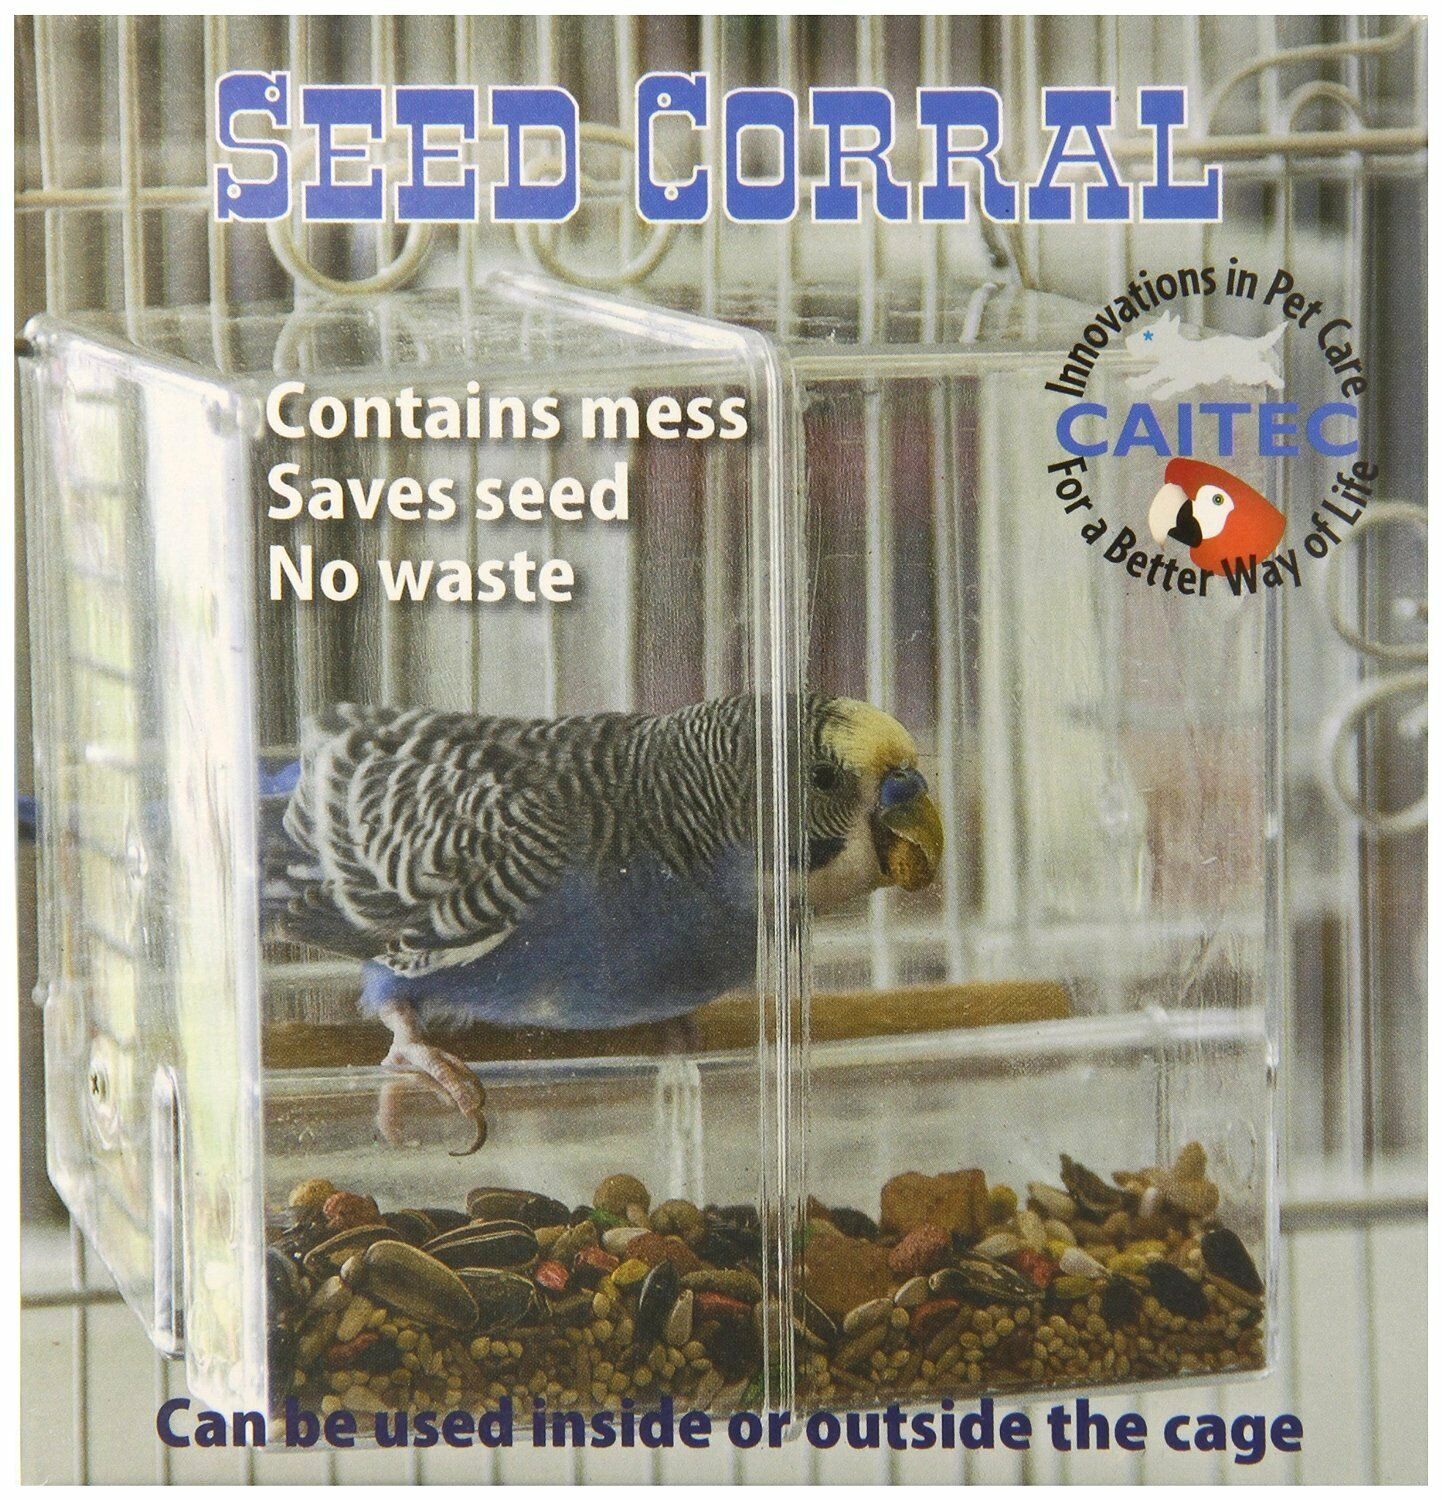 Seed Saver Corral No Bird Mess Tidy Cage Feeder Budgies Canary Cockatiel Finch